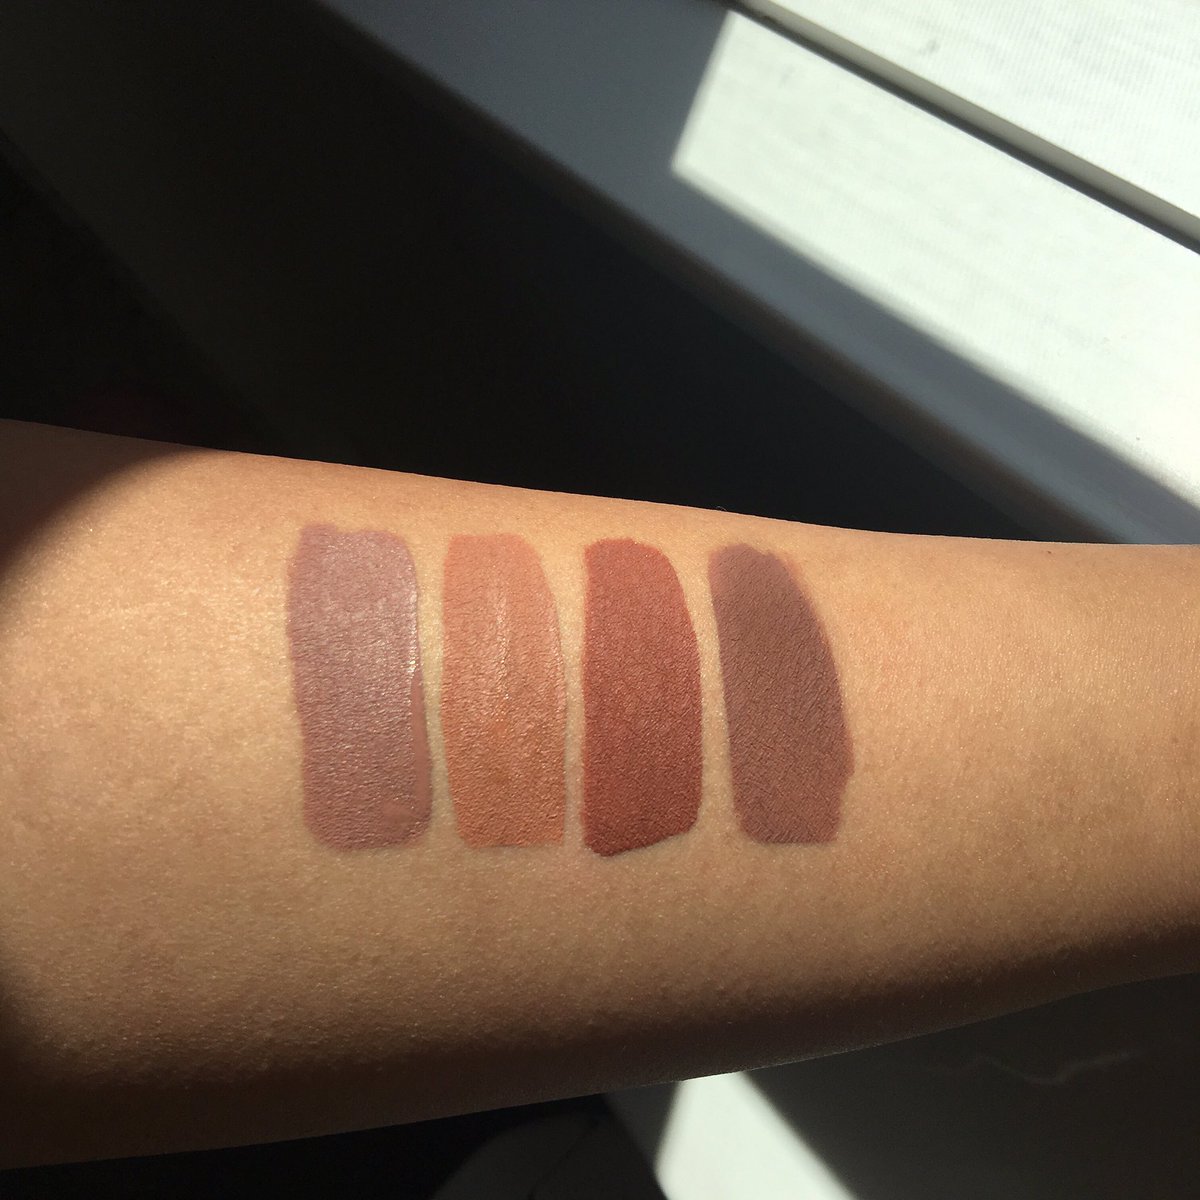 Left to Right still available: Maliboo, Exposed, Ginger, Dolce. KylieCosmetics.com